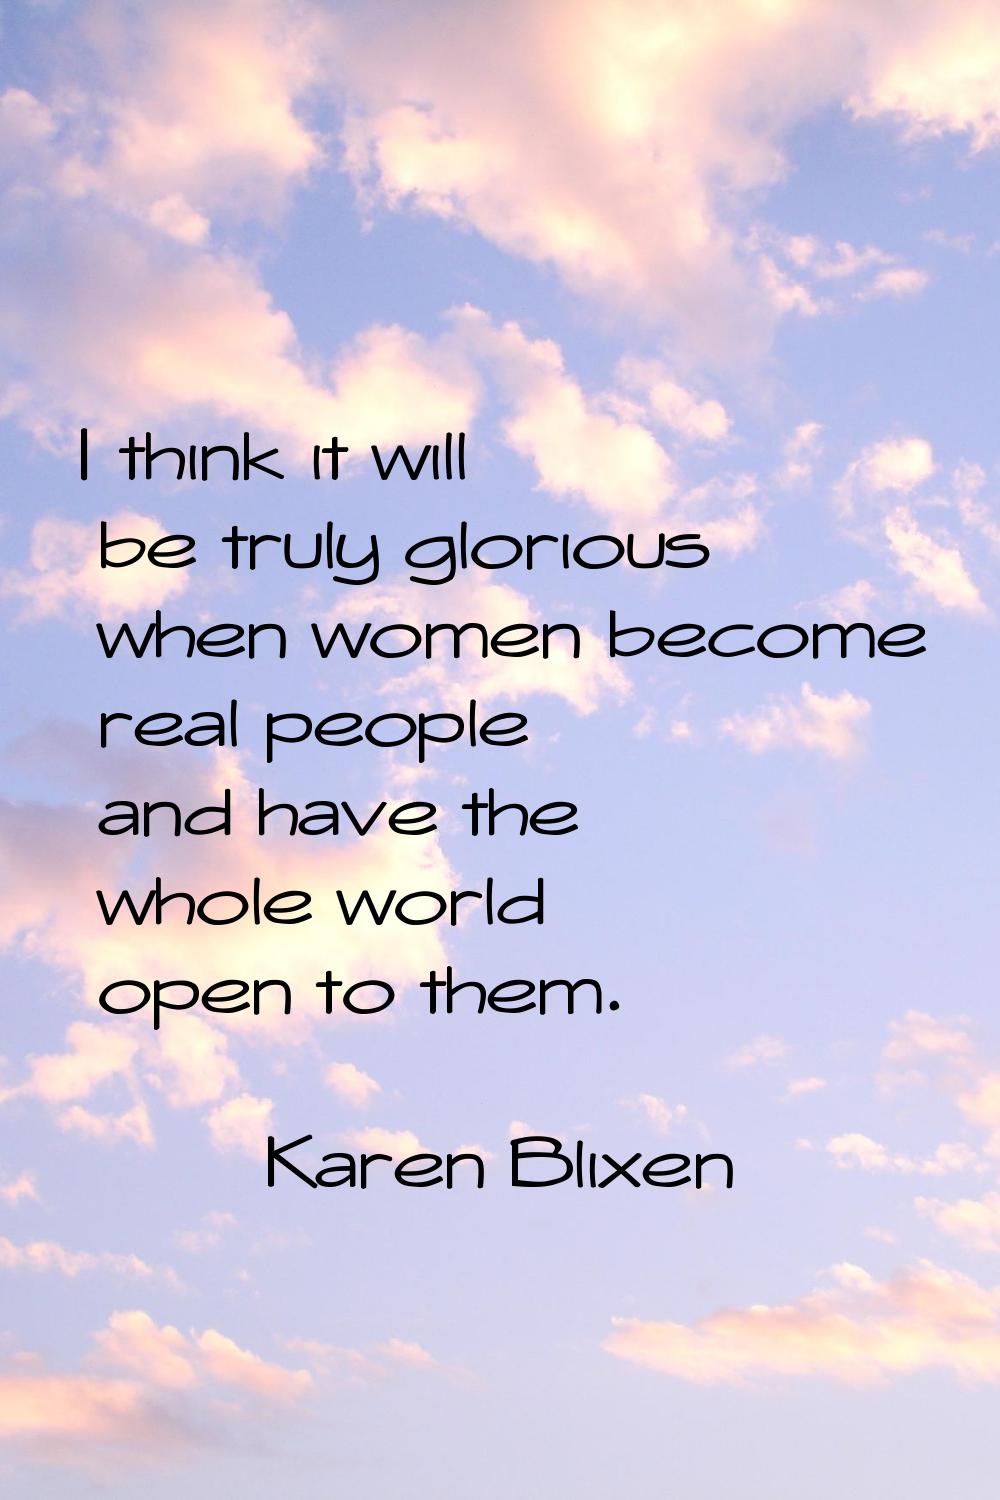 I think it will be truly glorious when women become real people and have the whole world open to th